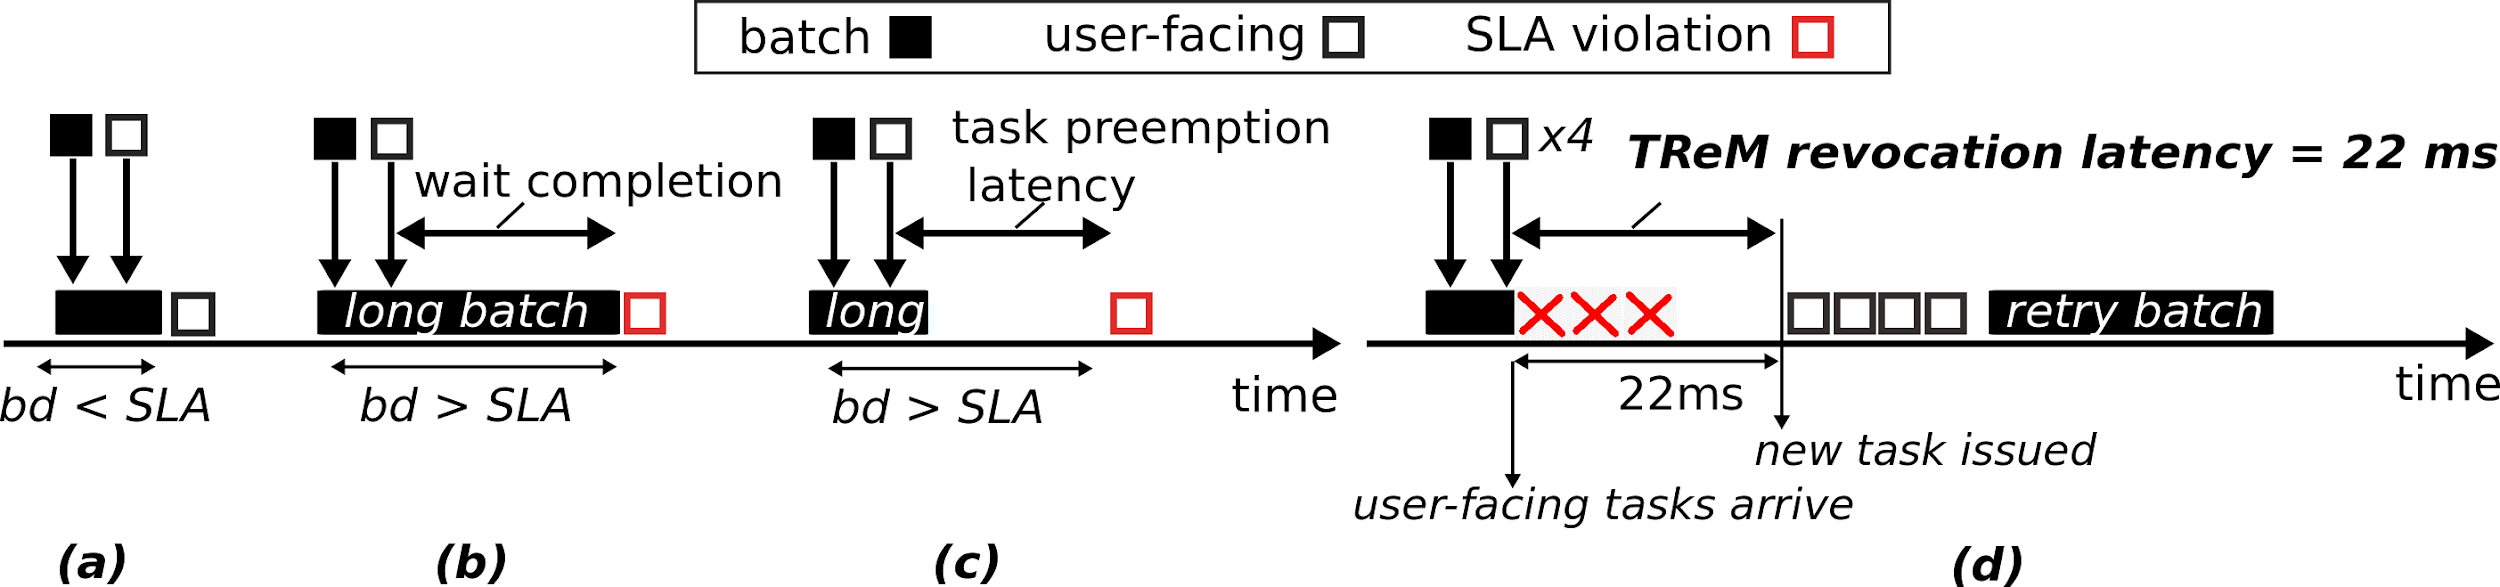 Scenarios of user-facing and batch tasks time sharing a GPU. If a batch task is executed when a user-facing task arrives, priority inversion occurs. (a) User-facing tasks will not miss their SLA, if the duration of the batch task (bd) is considerably smaller than the SLA [1]. (b) Otherwise the same scenario can result in SLA violations with the existing approaches. (c) Effectively, we need a low-latency mechanism to preempt or revoke the batch task. (d): The timing of TReM.